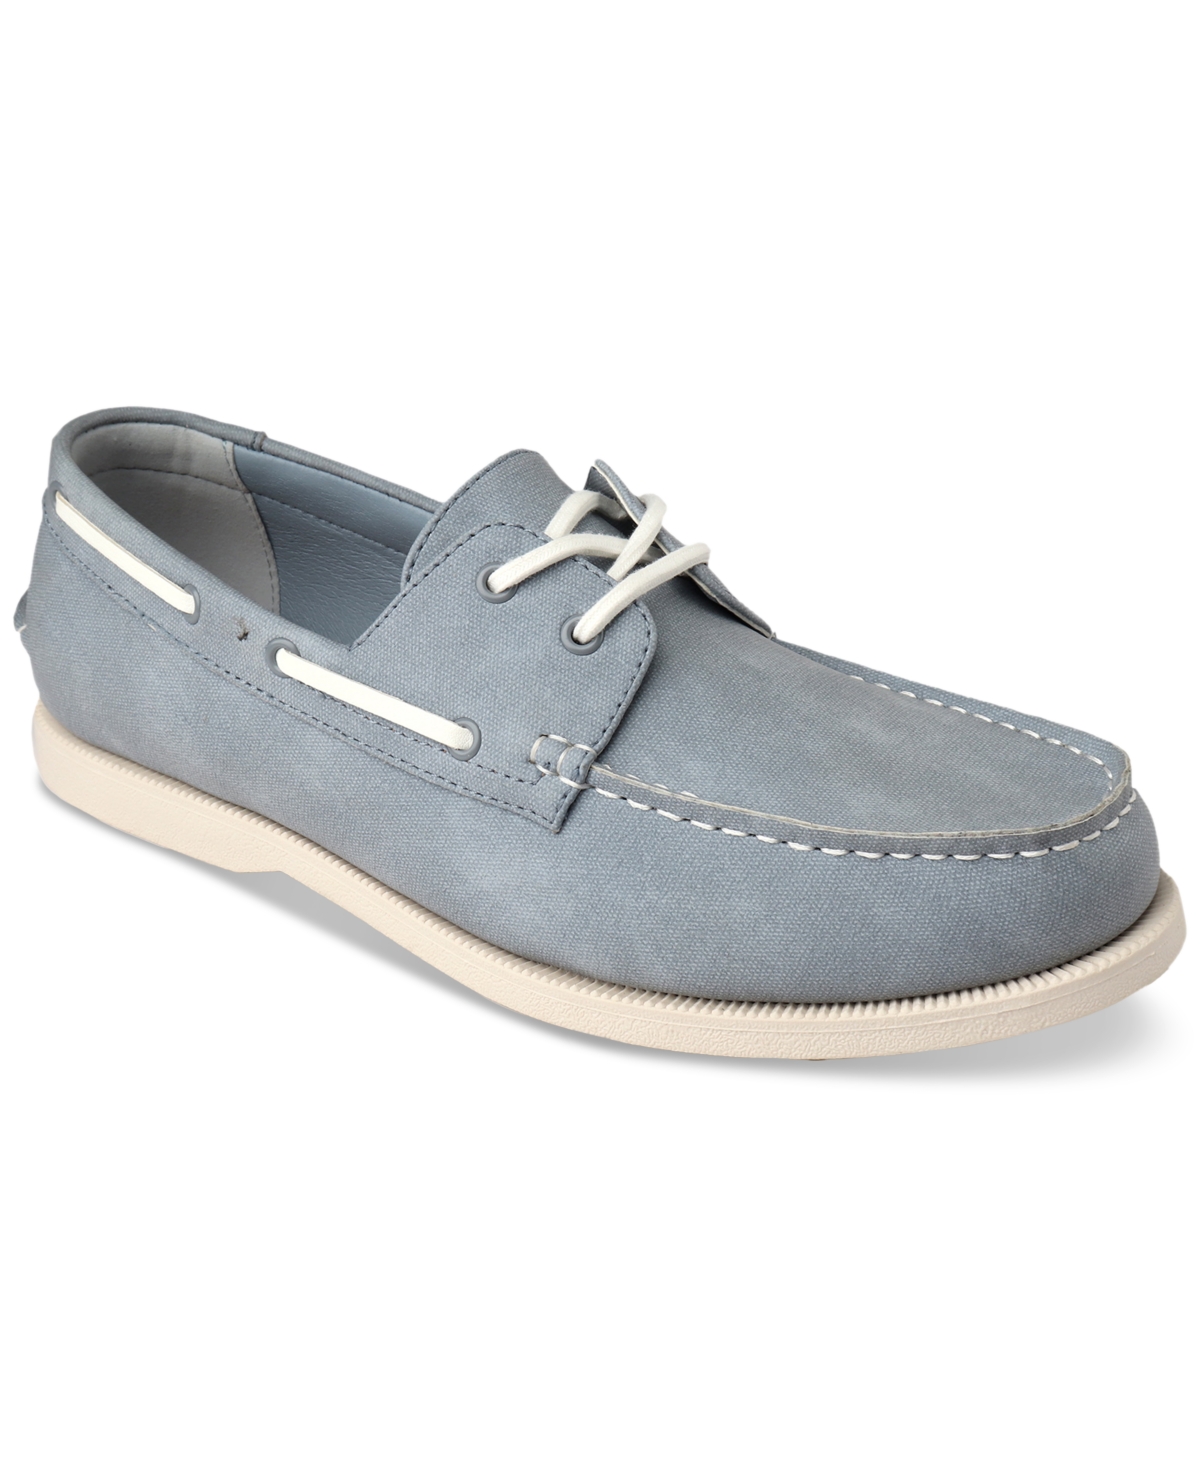 Men's Elliot Lace-Up Boat Shoes, Created for Macy's - Light Blue